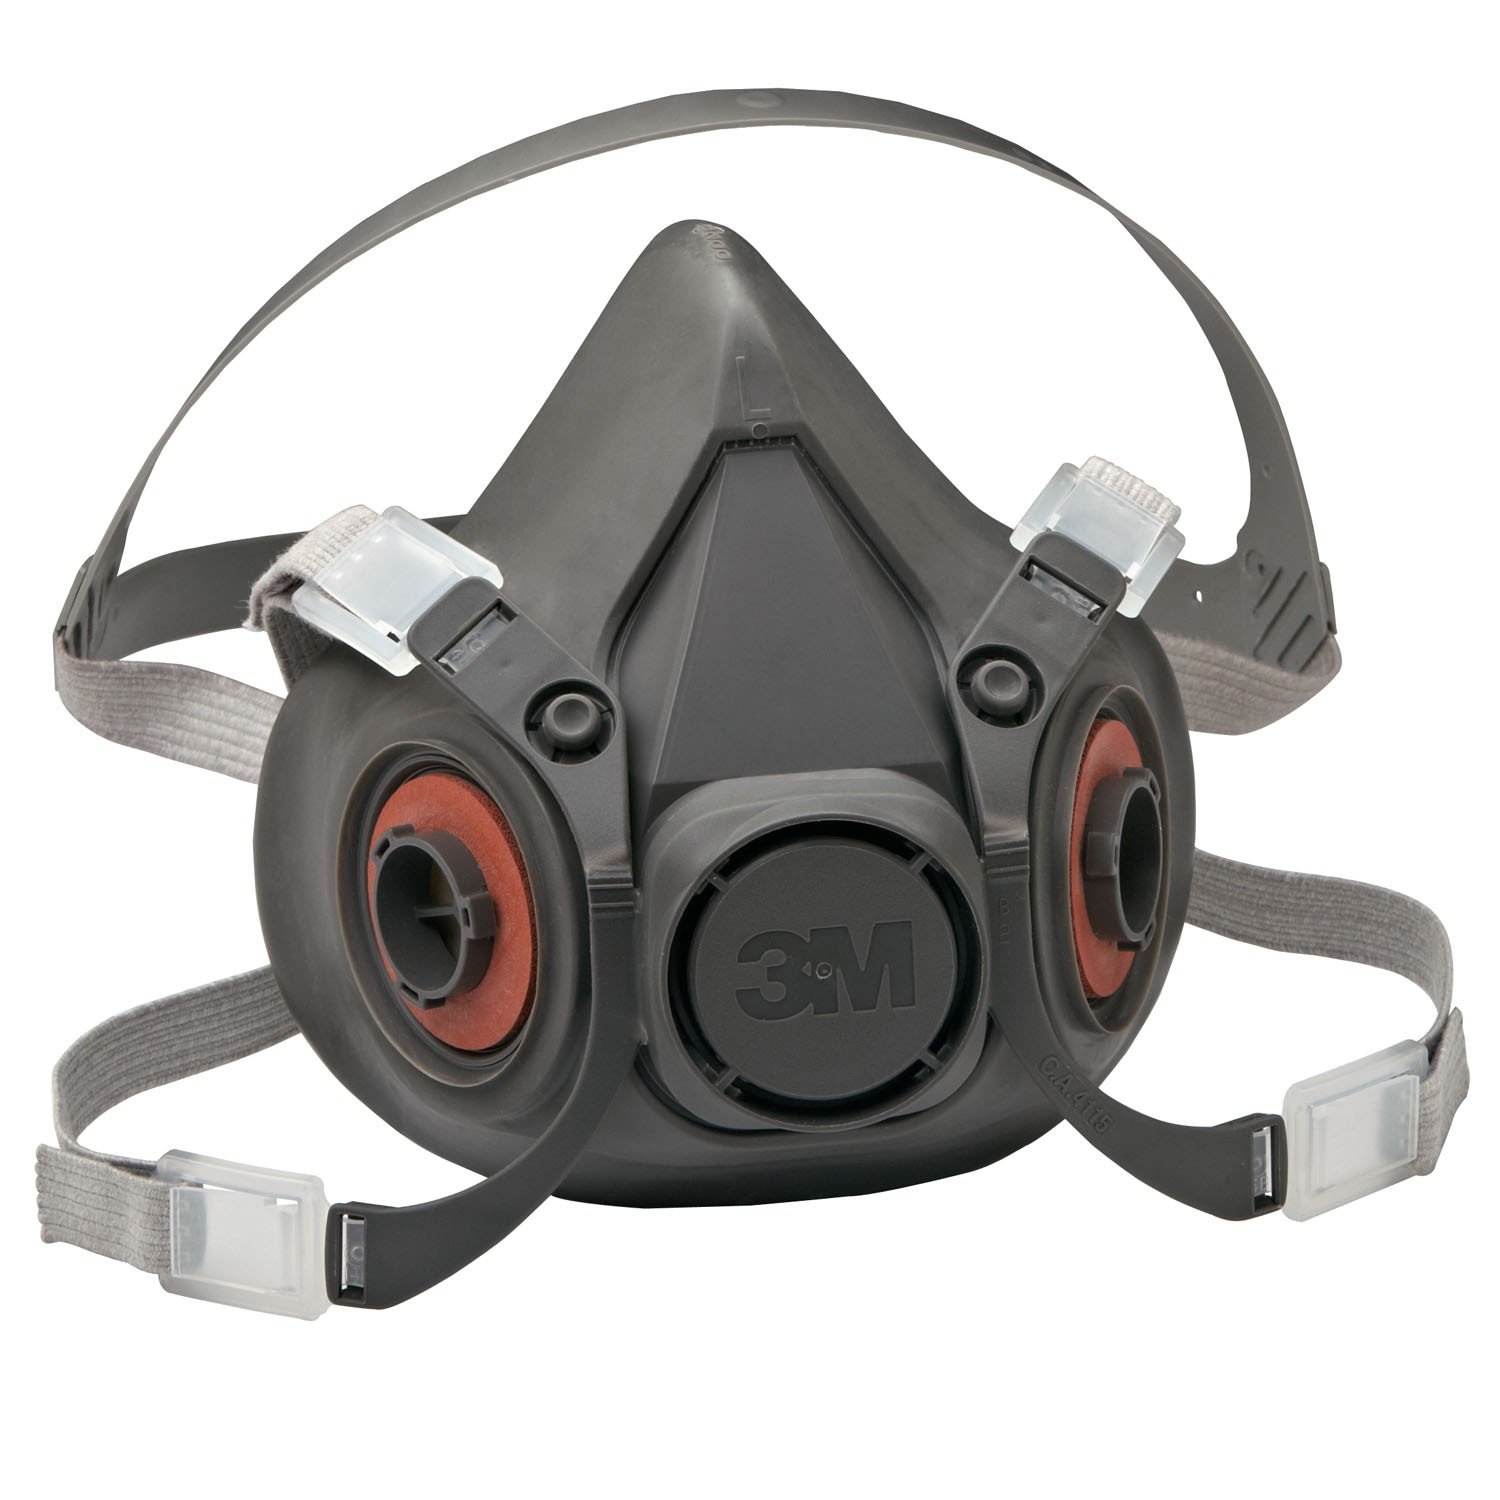  3M 6200 Half Face Mask - Half Mask Respirators for Personal Safety